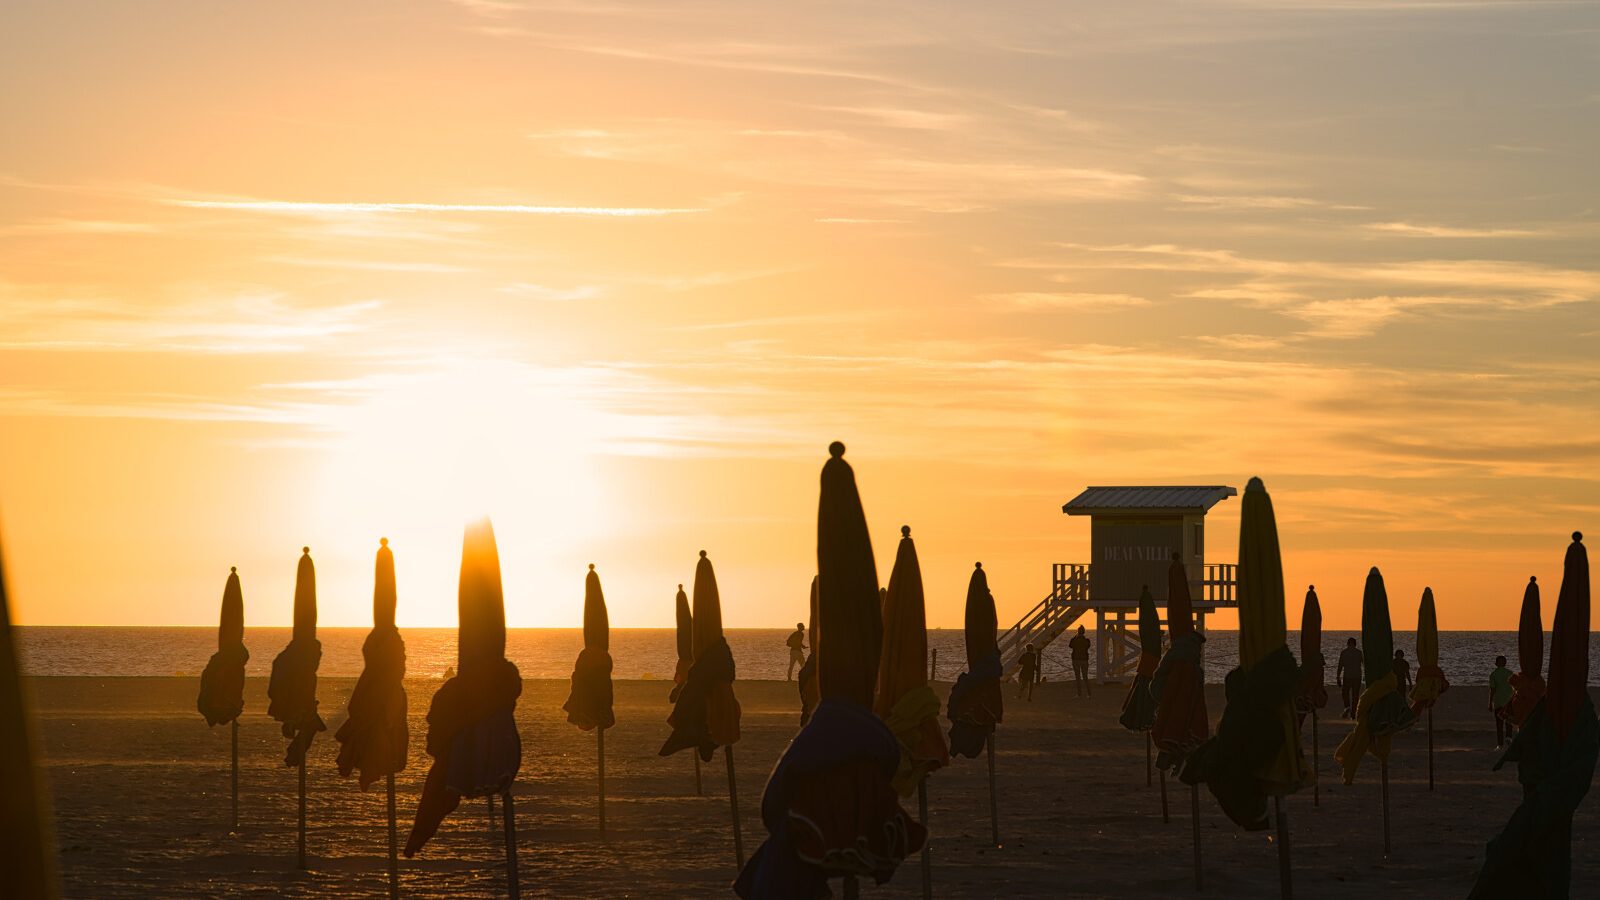 Sunset behind the parasols of Deauville in Normandy